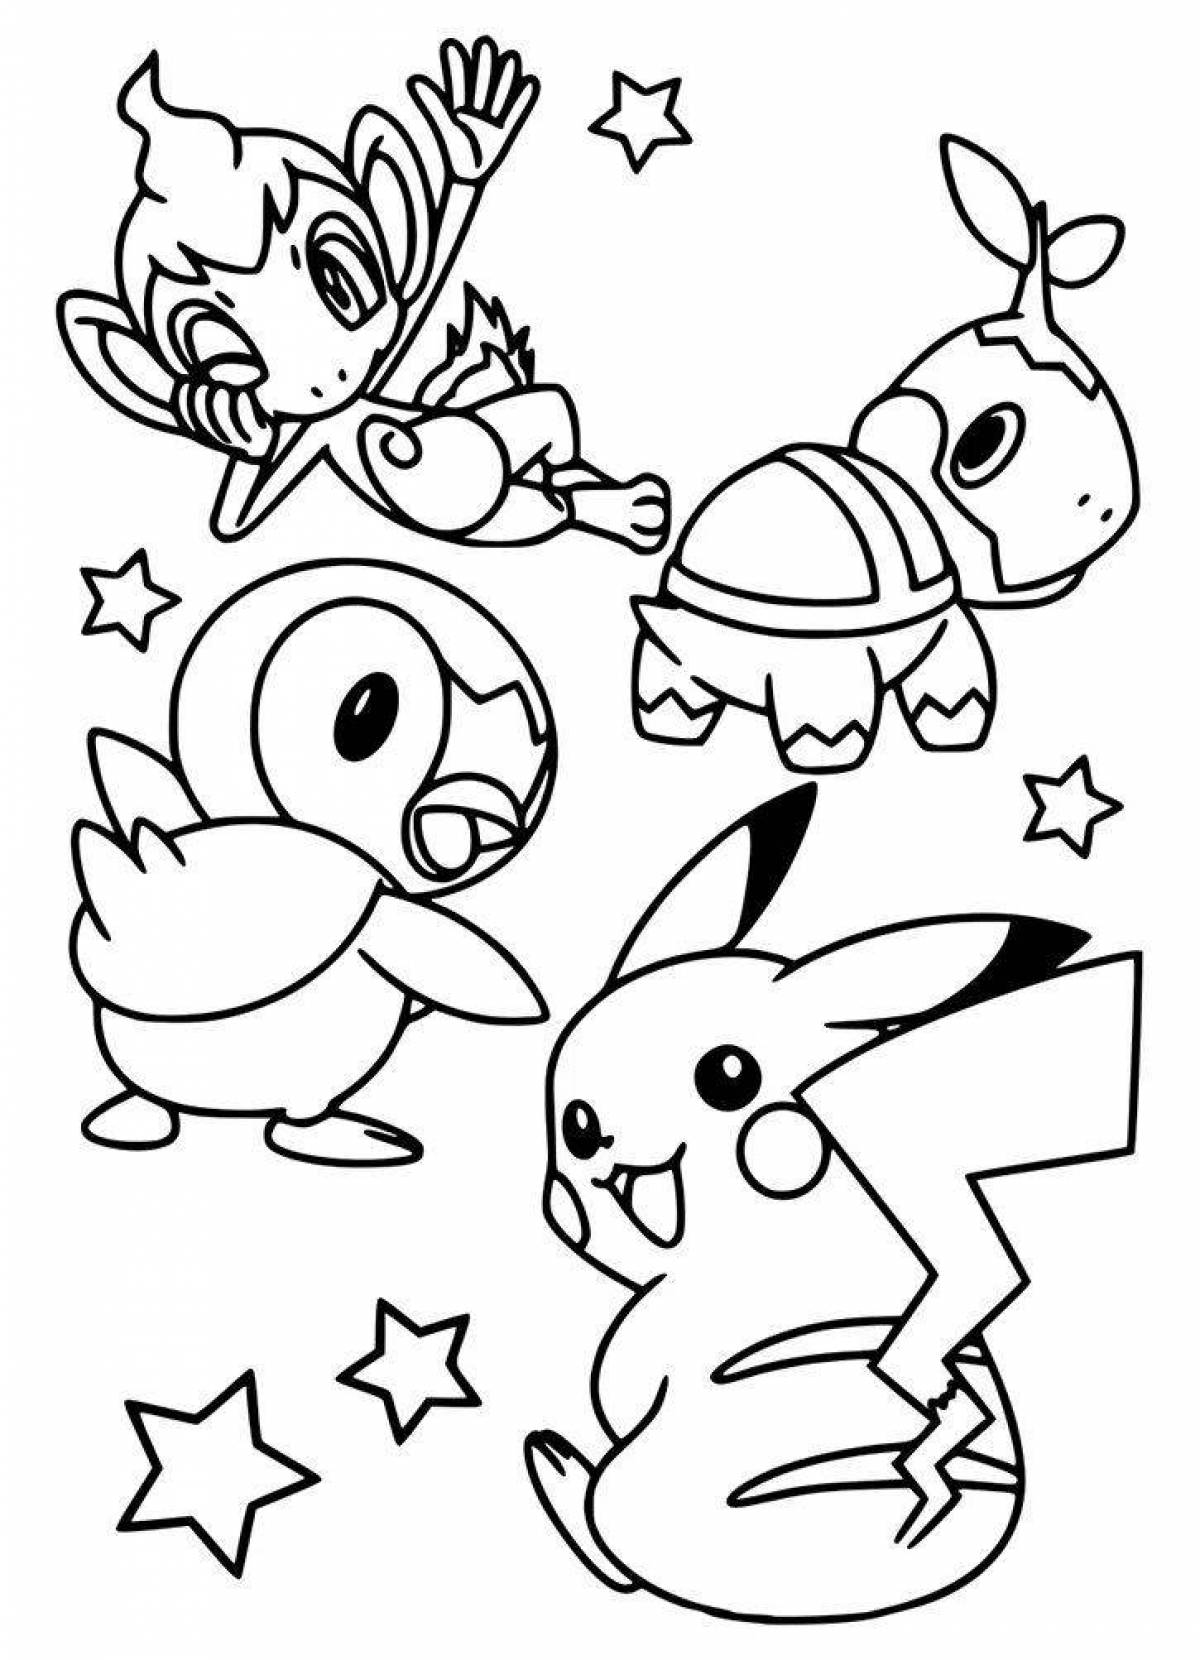 Playful pikachu and his friends